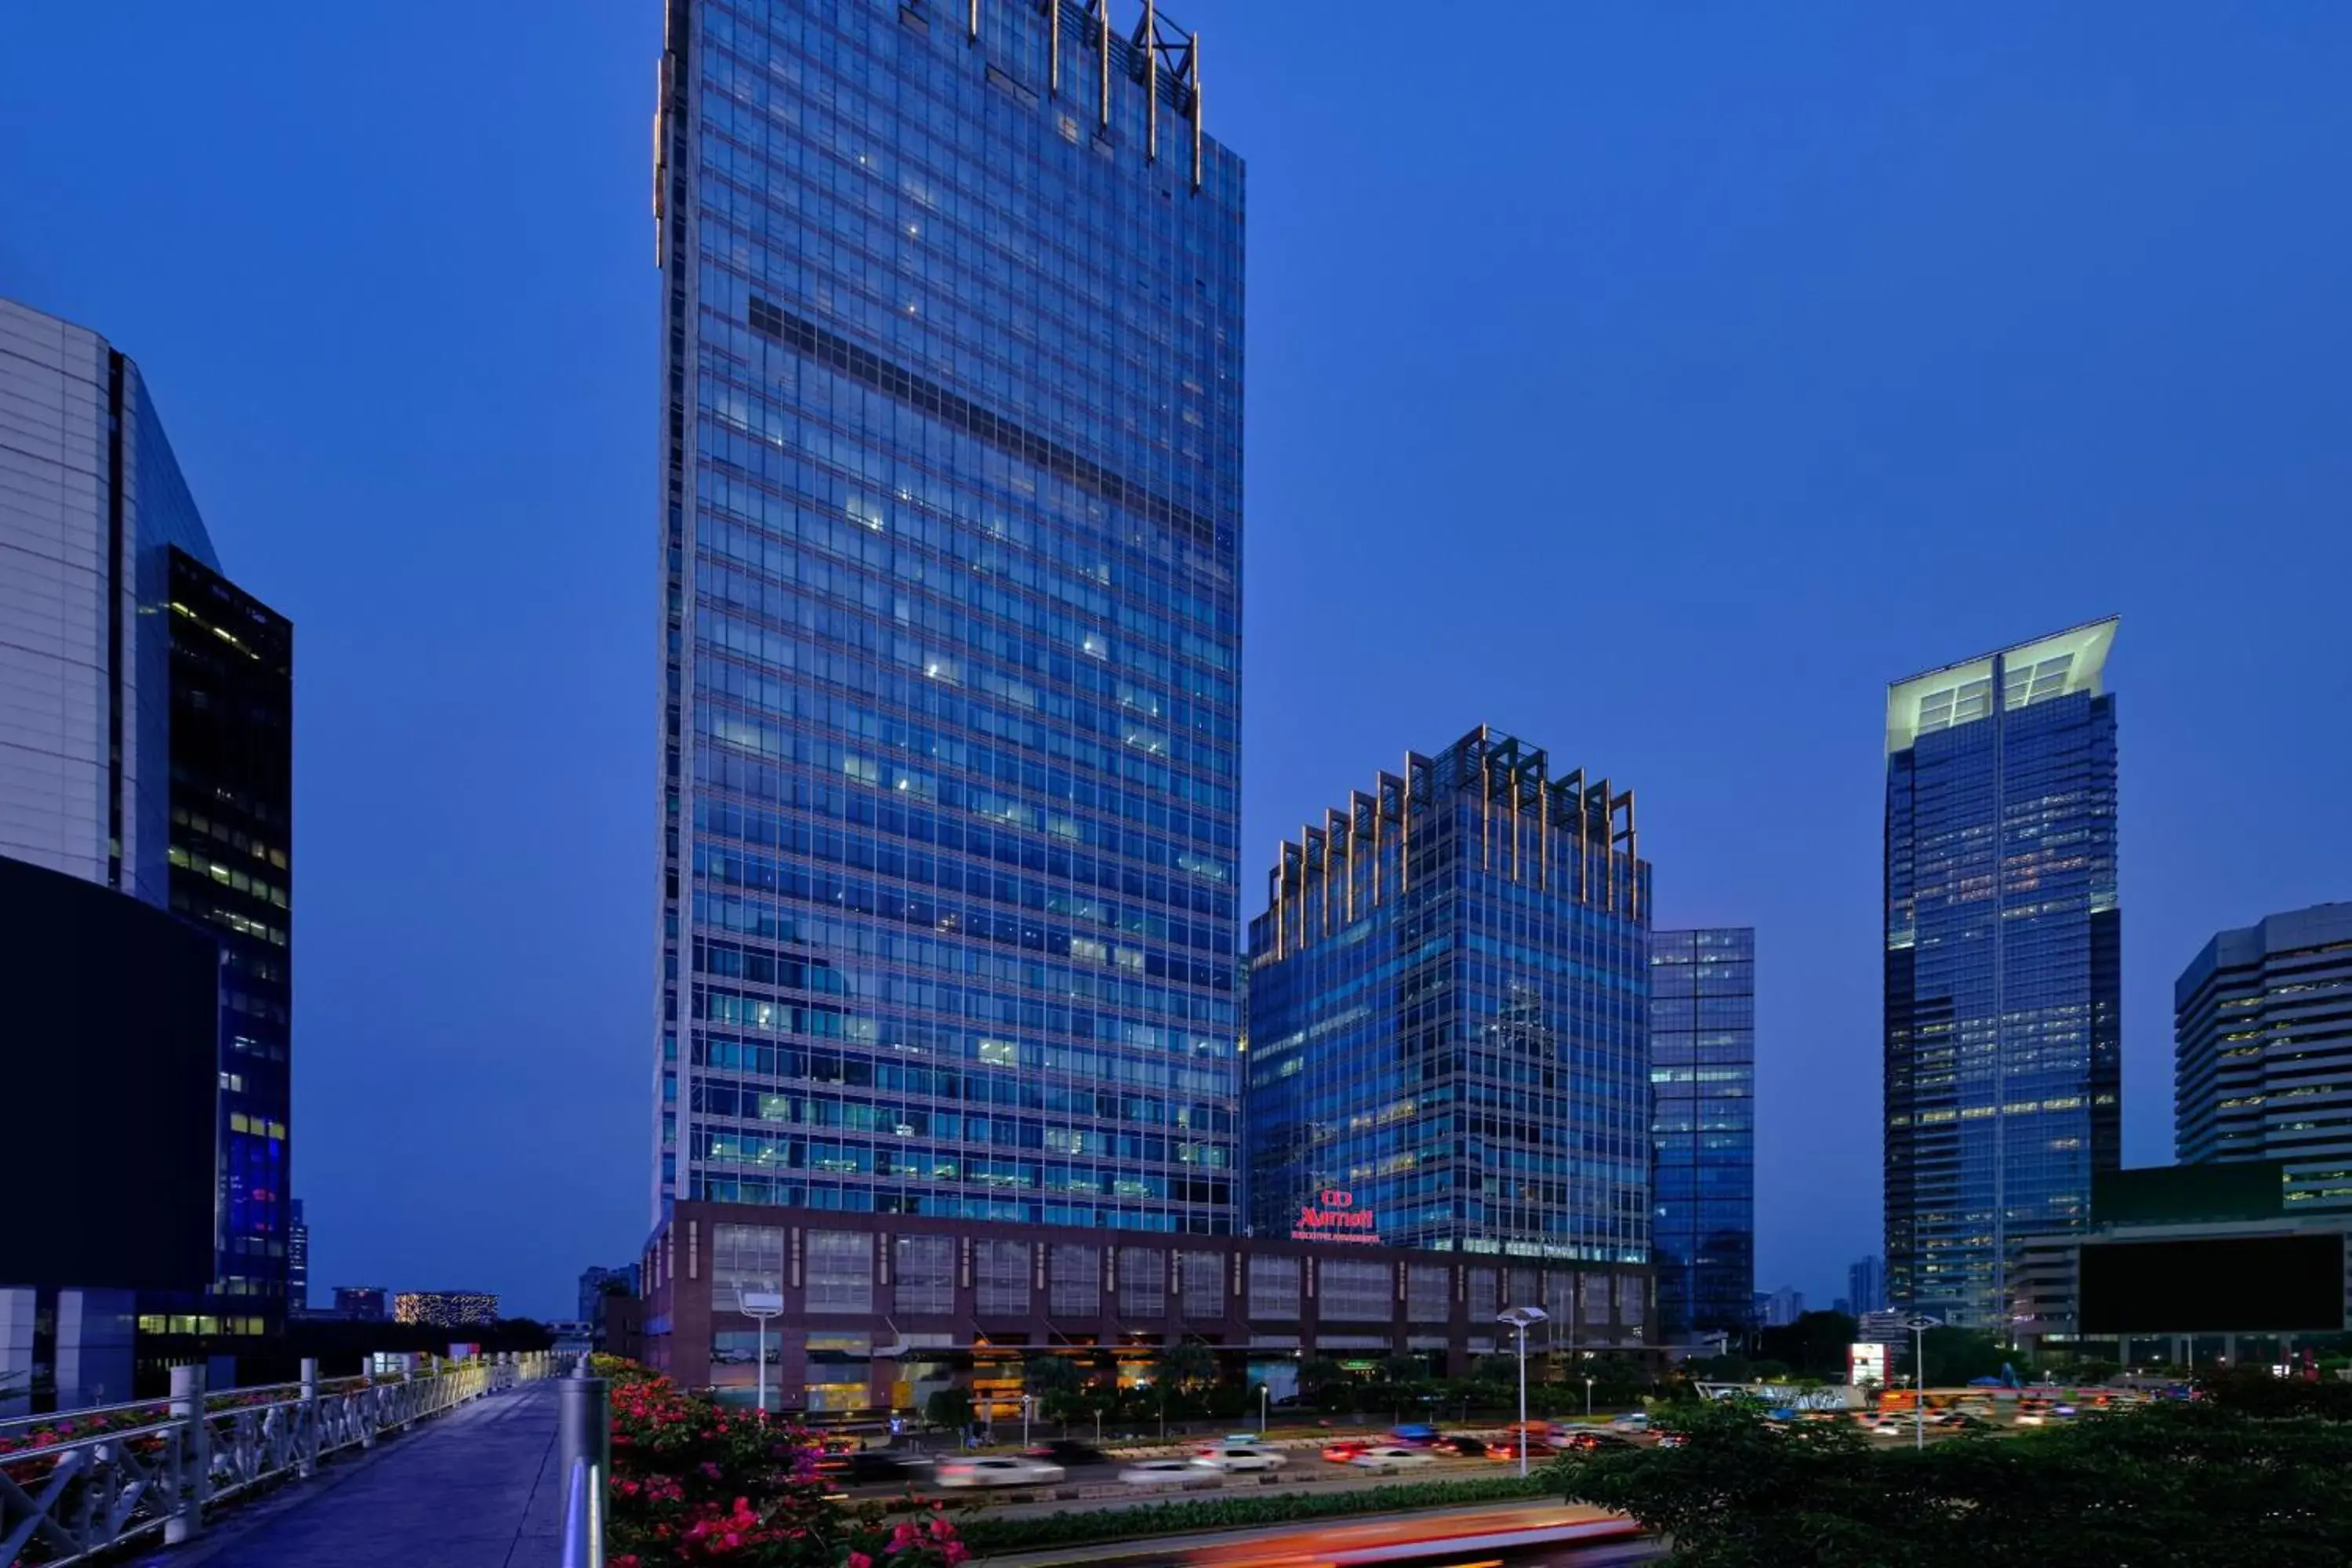 Property building in The Mayflower, Jakarta-Marriott Executive Apartments